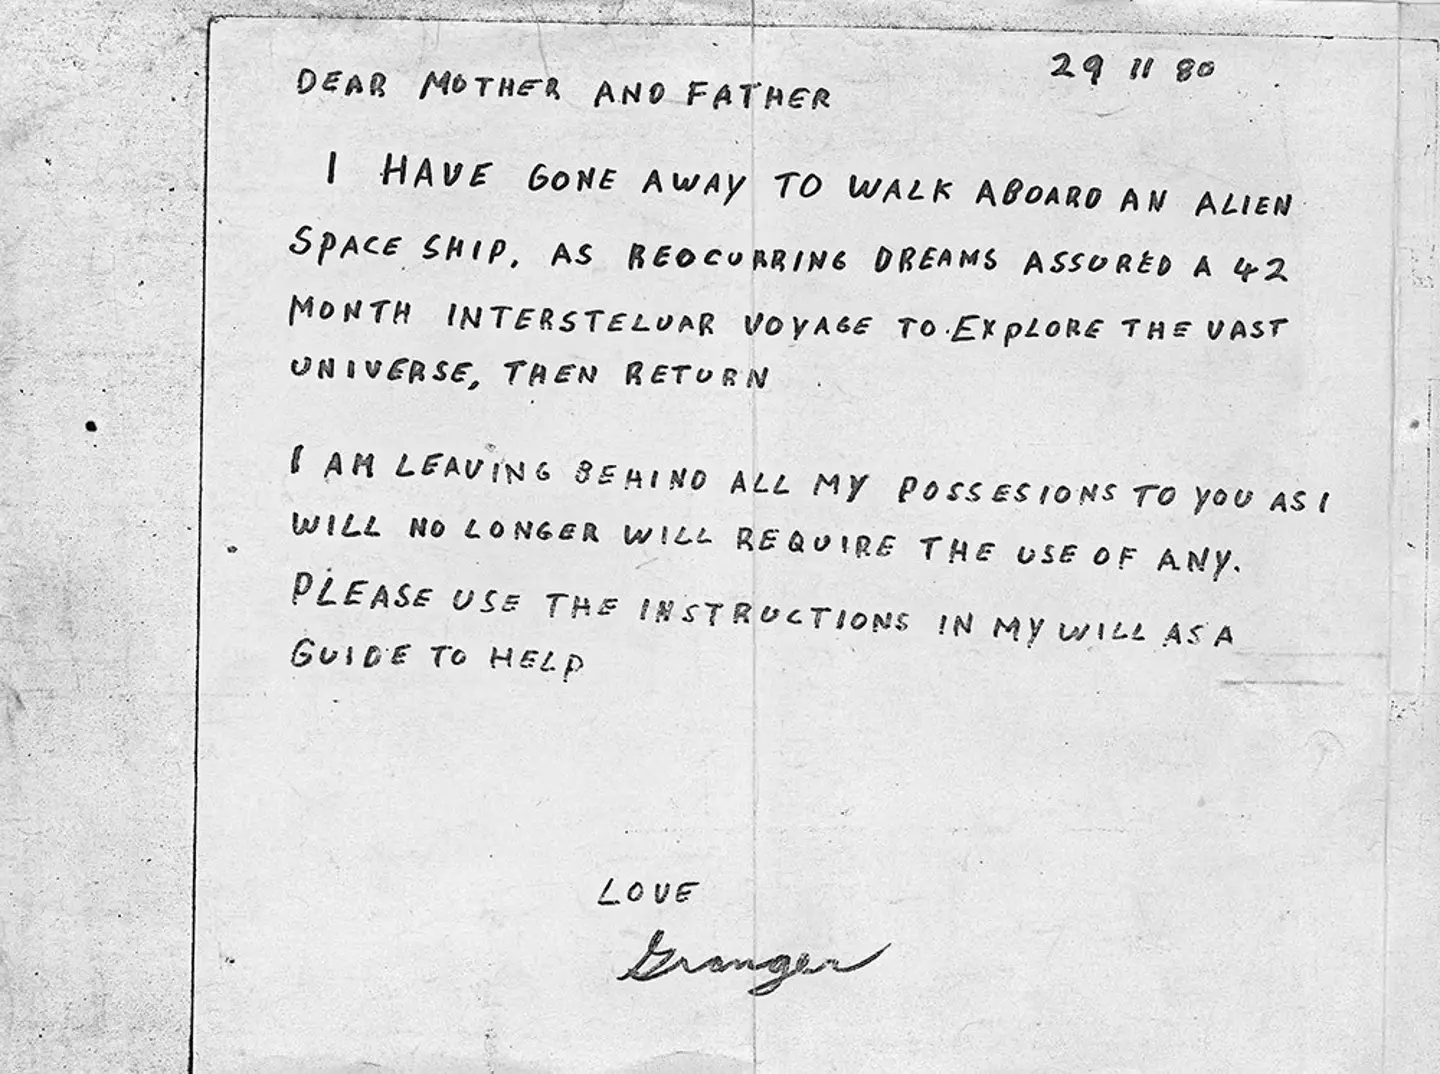 Granger Taylor left this note for his family the night he disappeared, claiming he was about to board an alien spaceship.